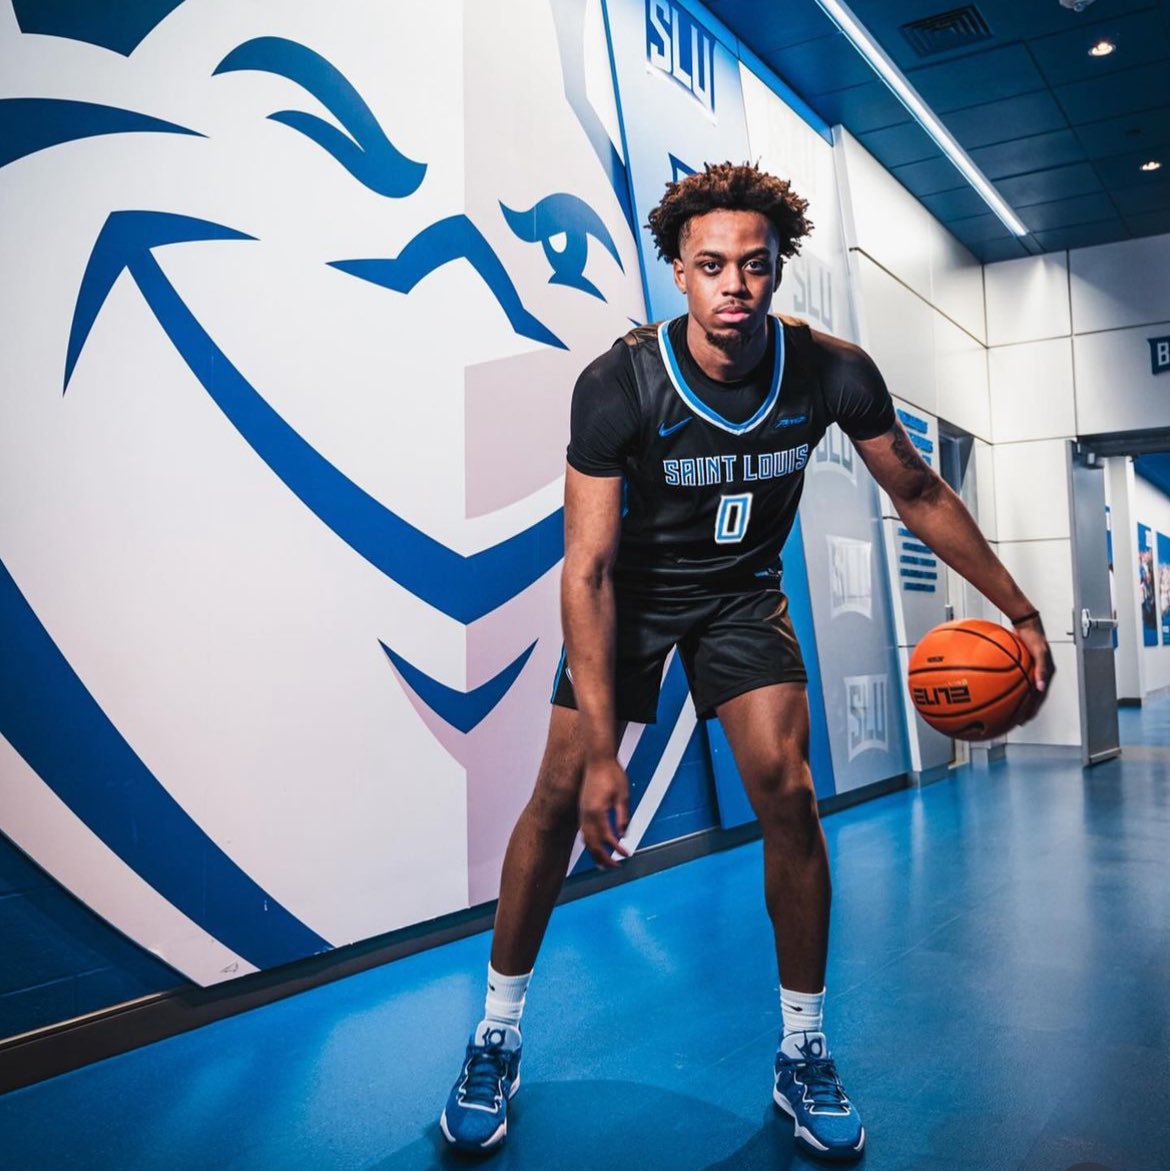 The addition of Brown transfer Kalu Anya officially makes St. Louis a force in the A10.

Anya is a young, talented interior force. Can both score within and protect the paint at a high level. 

Josh Schertz is going to have a loaded roster in his first year with the Billikens.